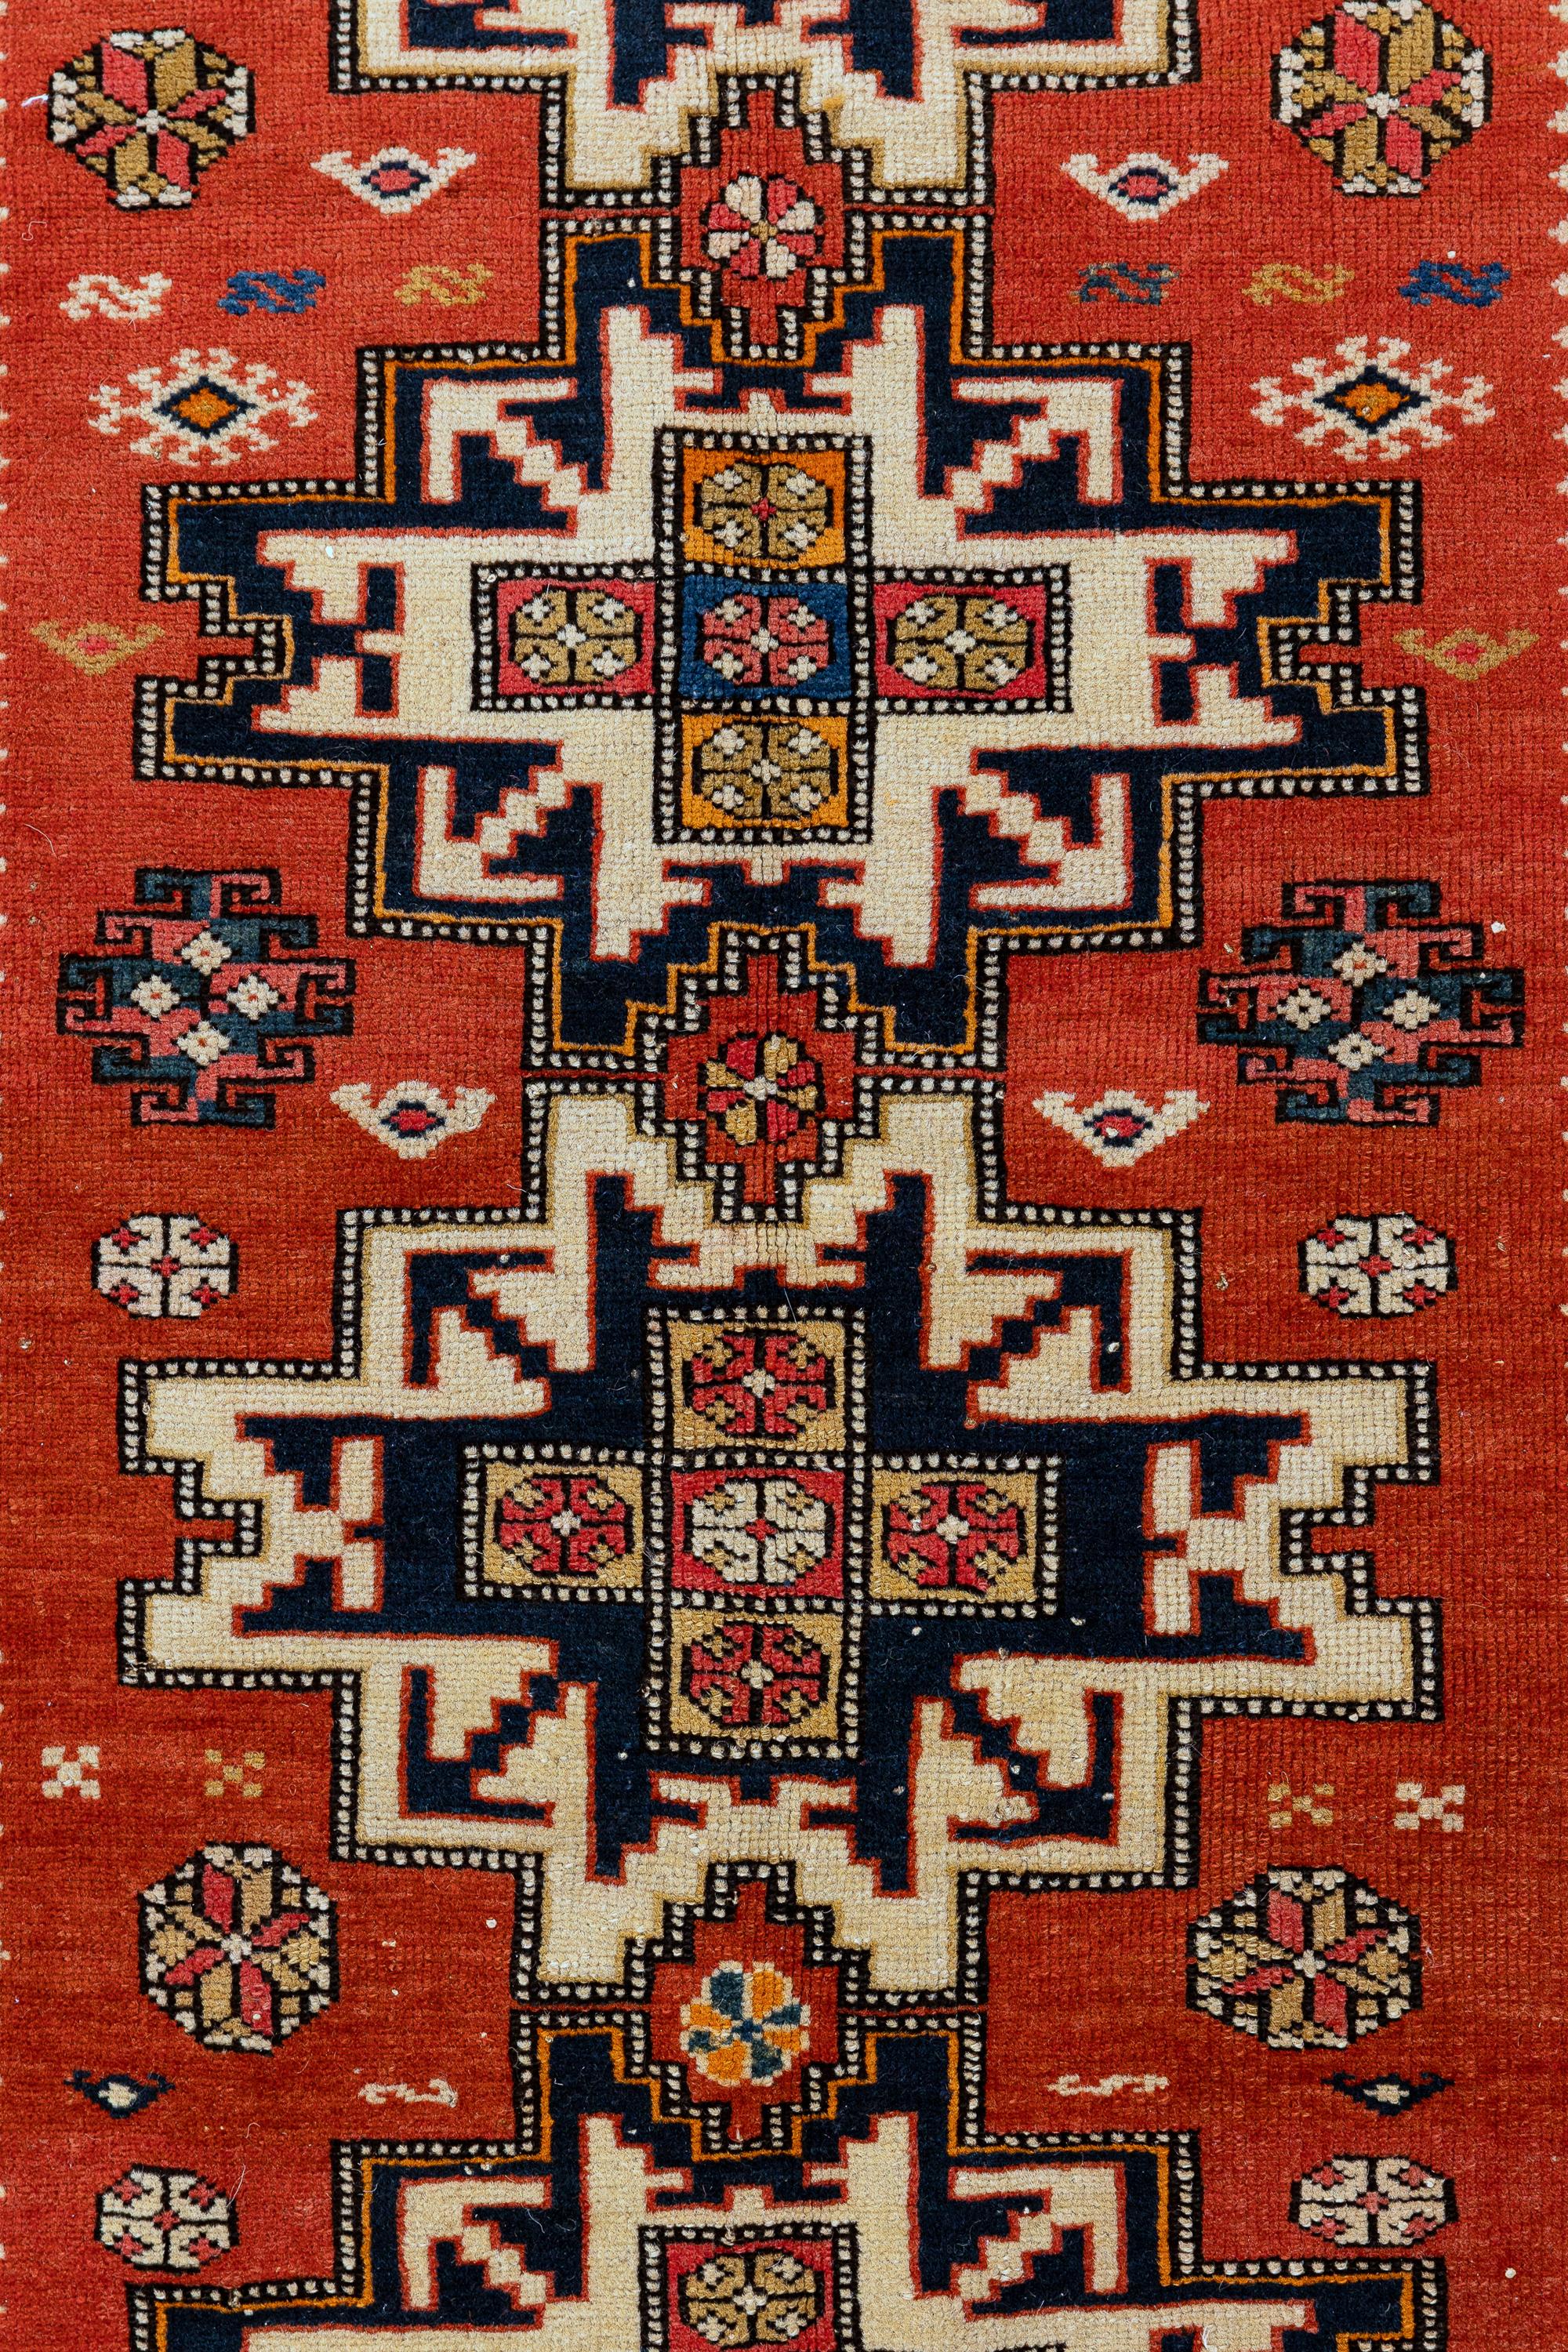 Chichi – Kuba, Northeast Caucasus

This vibrant Caucasian Chichi rug was made in modern-day Azerbaijan’s Kuba (Quba) district. Six lesghi stars spread across the bright red background of the carpet. On the white background, small squares make up a